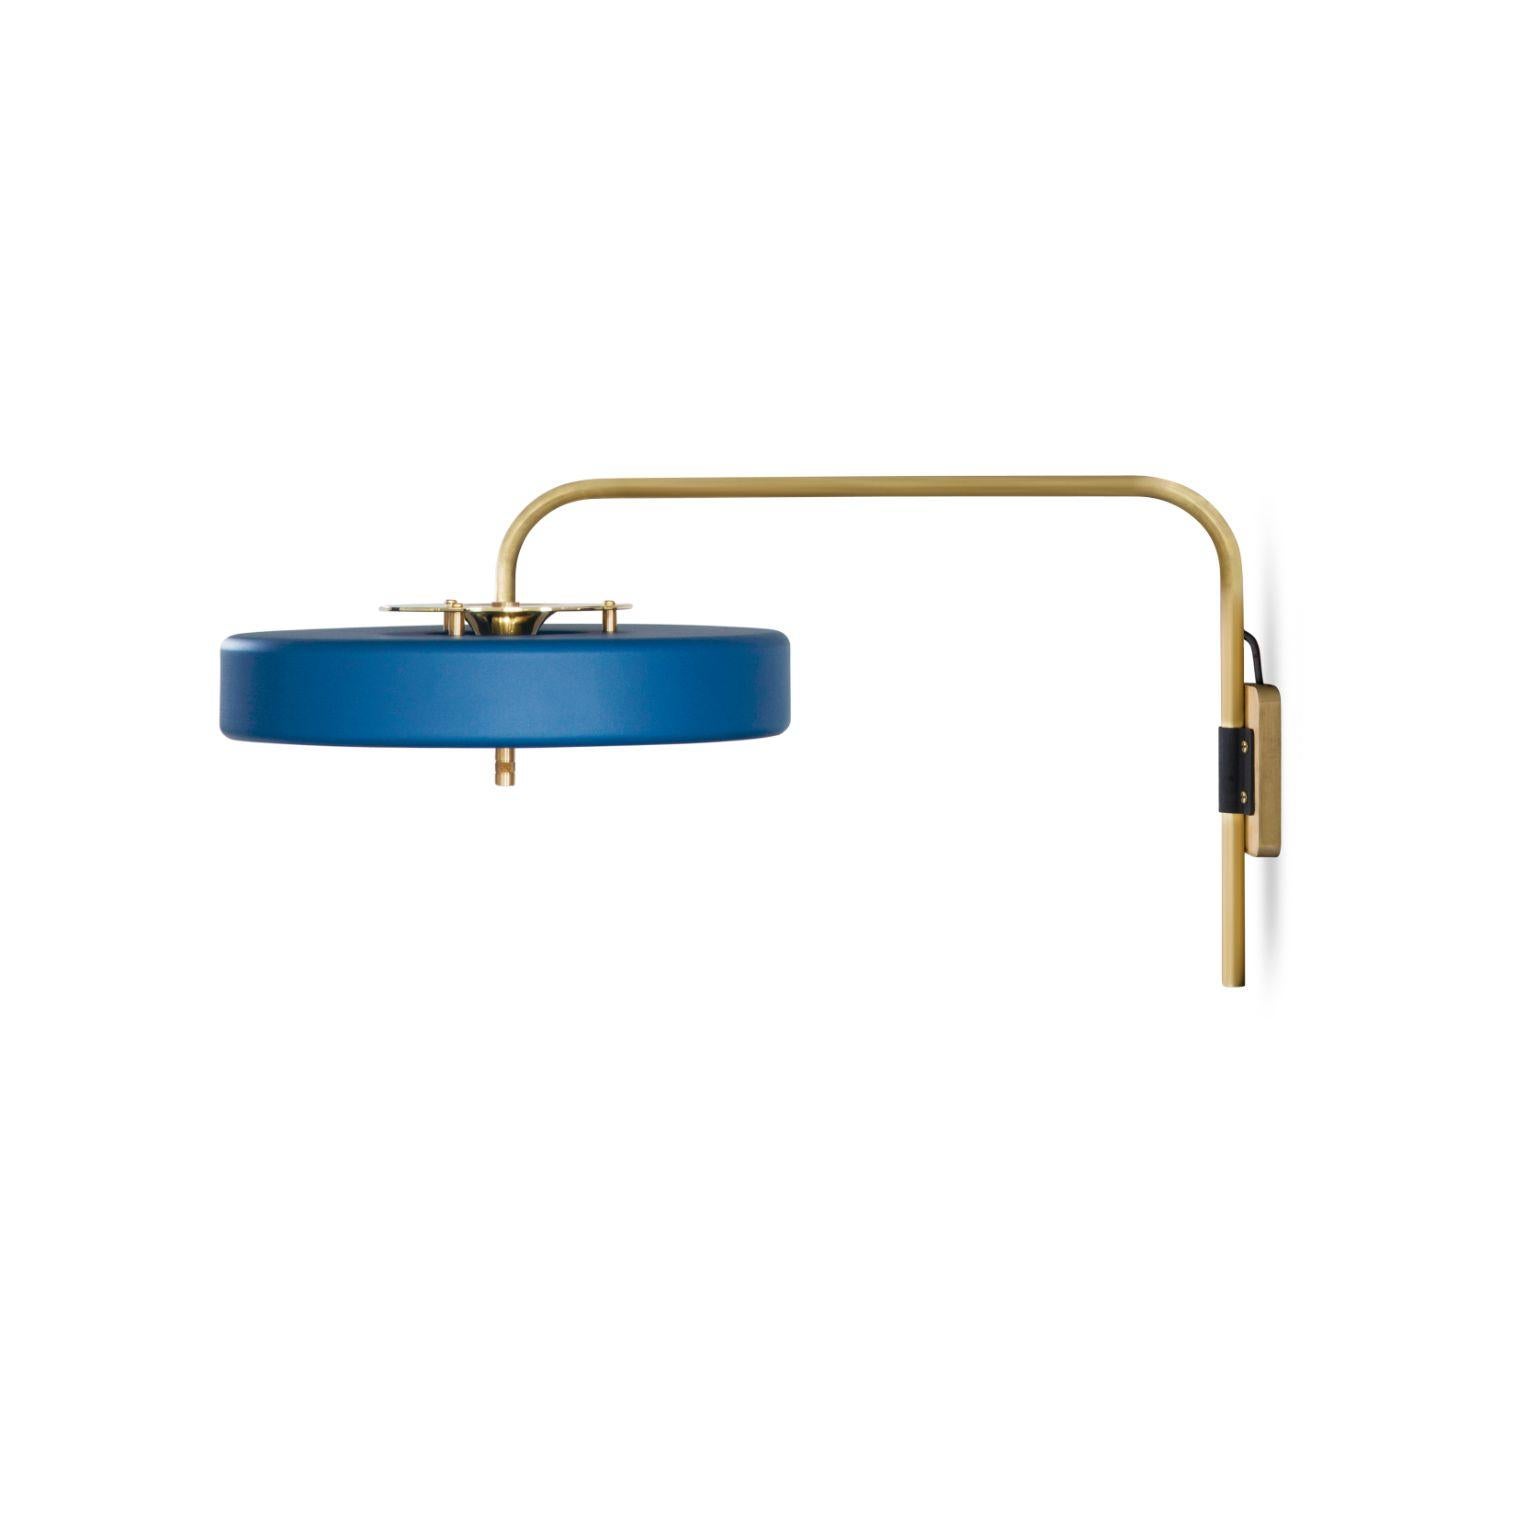 Revolve wall light - Polished brass - Blue by Bert Frank
Dimensions: 31 x 63 x 35 cm
Materials: Brass, Steel

Available in brushed brass

Flush-fitting opal glass shade with central dome of polished marble – white Carrara or green Guatemala –